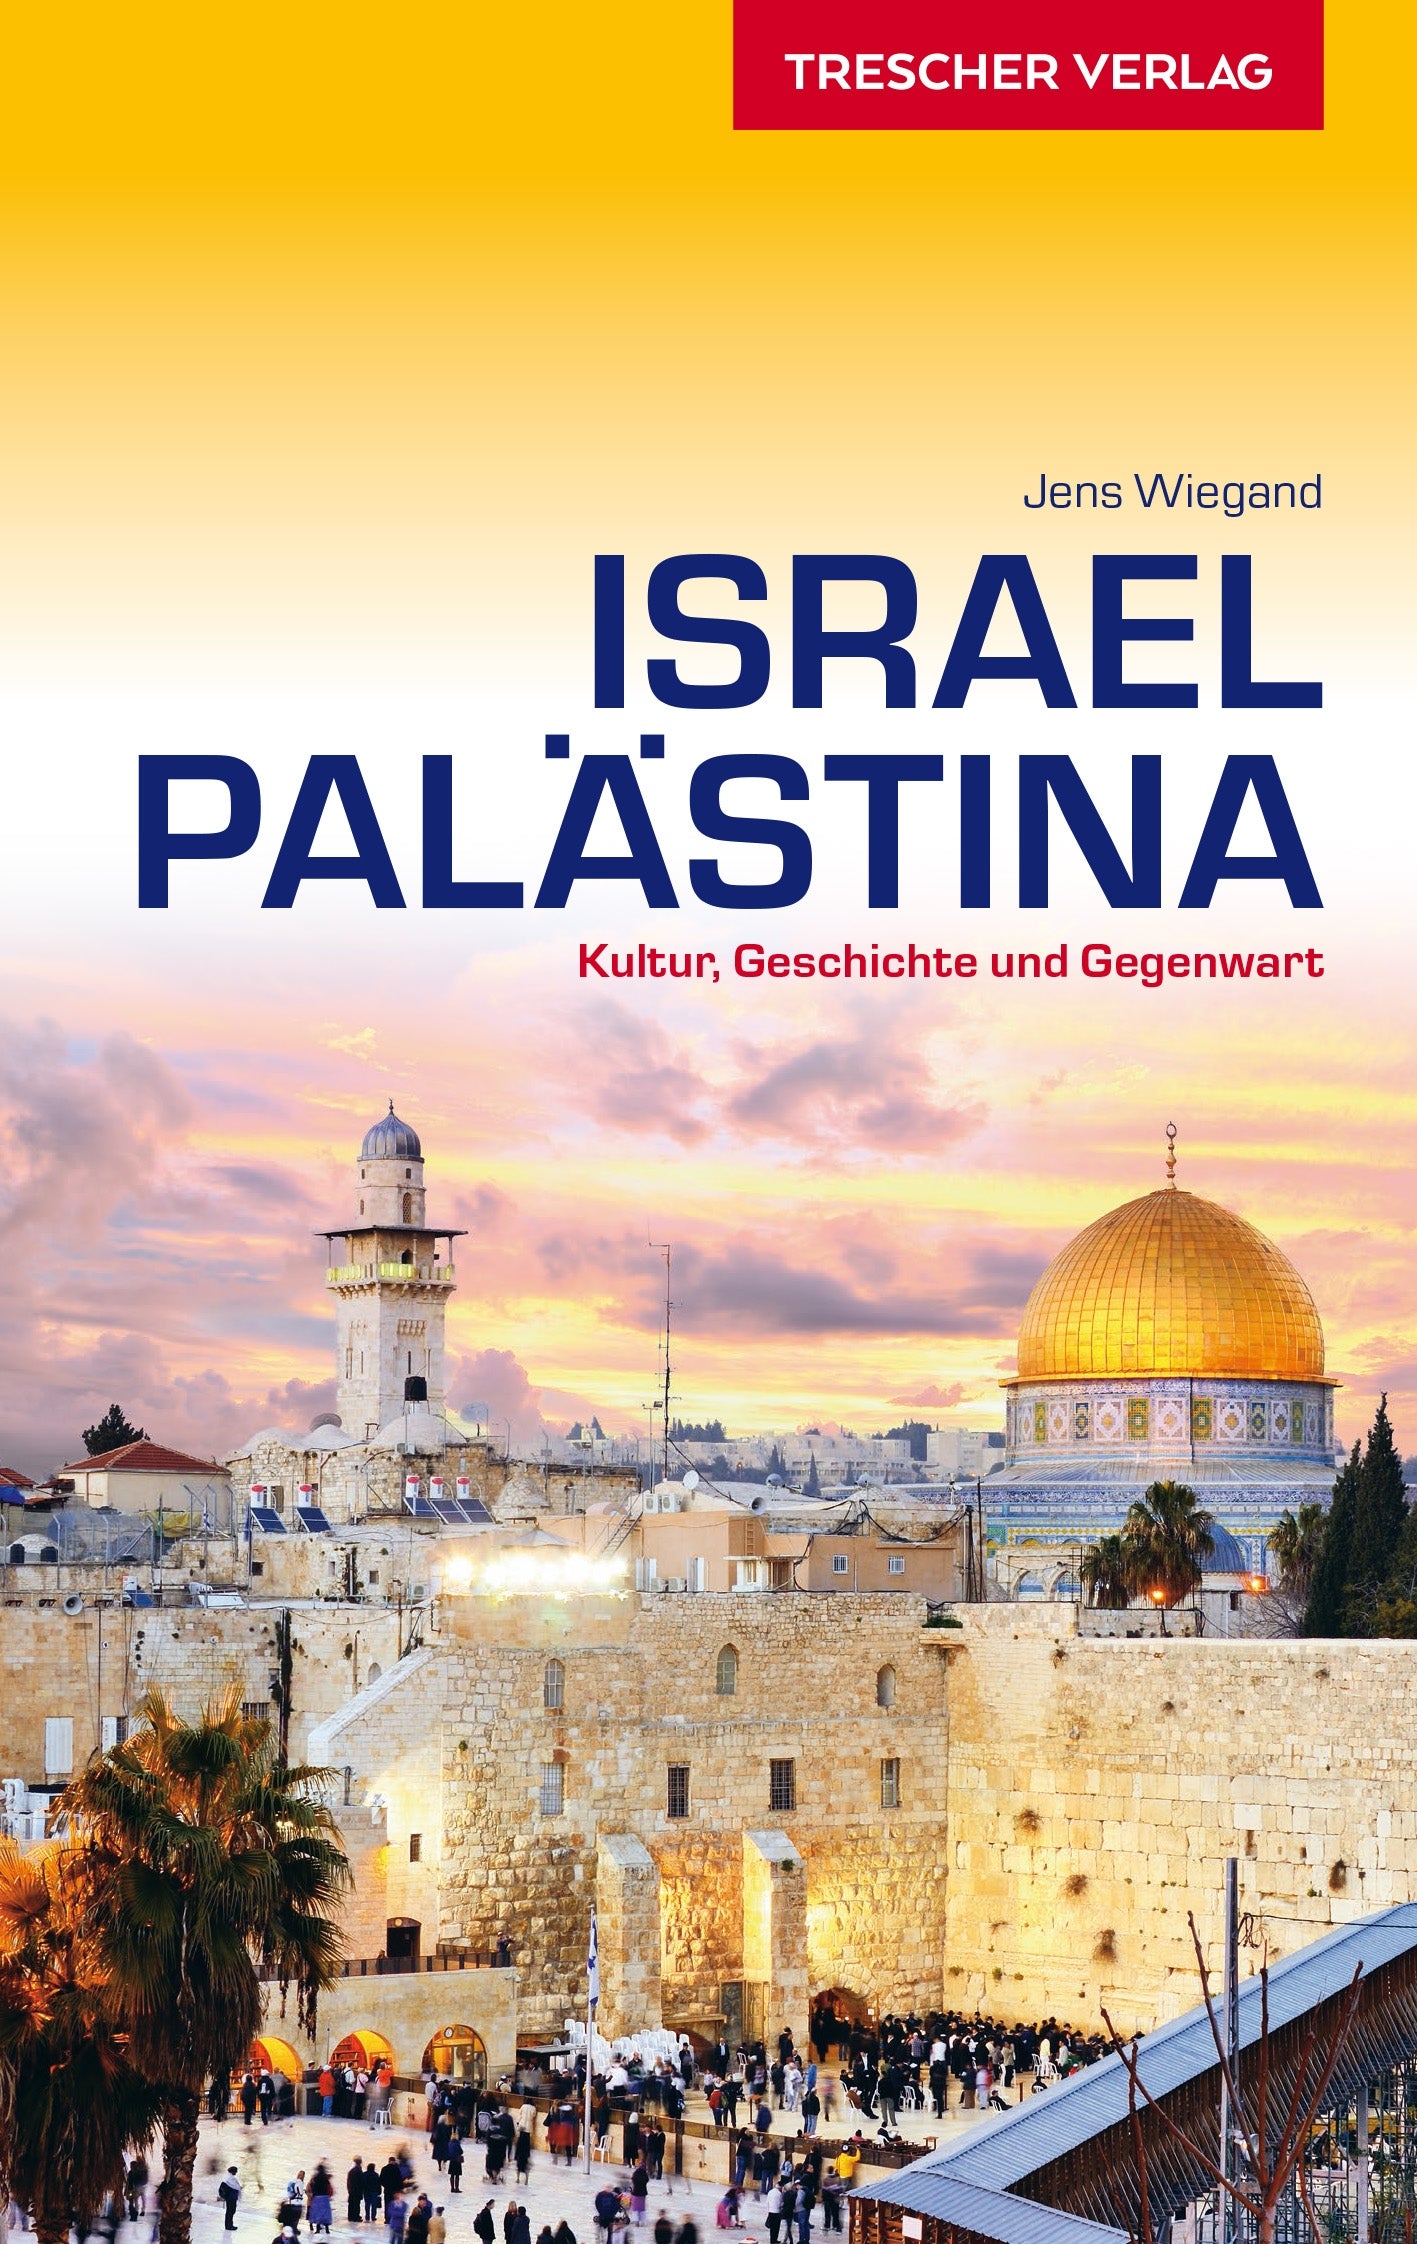 Travel guide to Israel and Palestine 2.A 2020